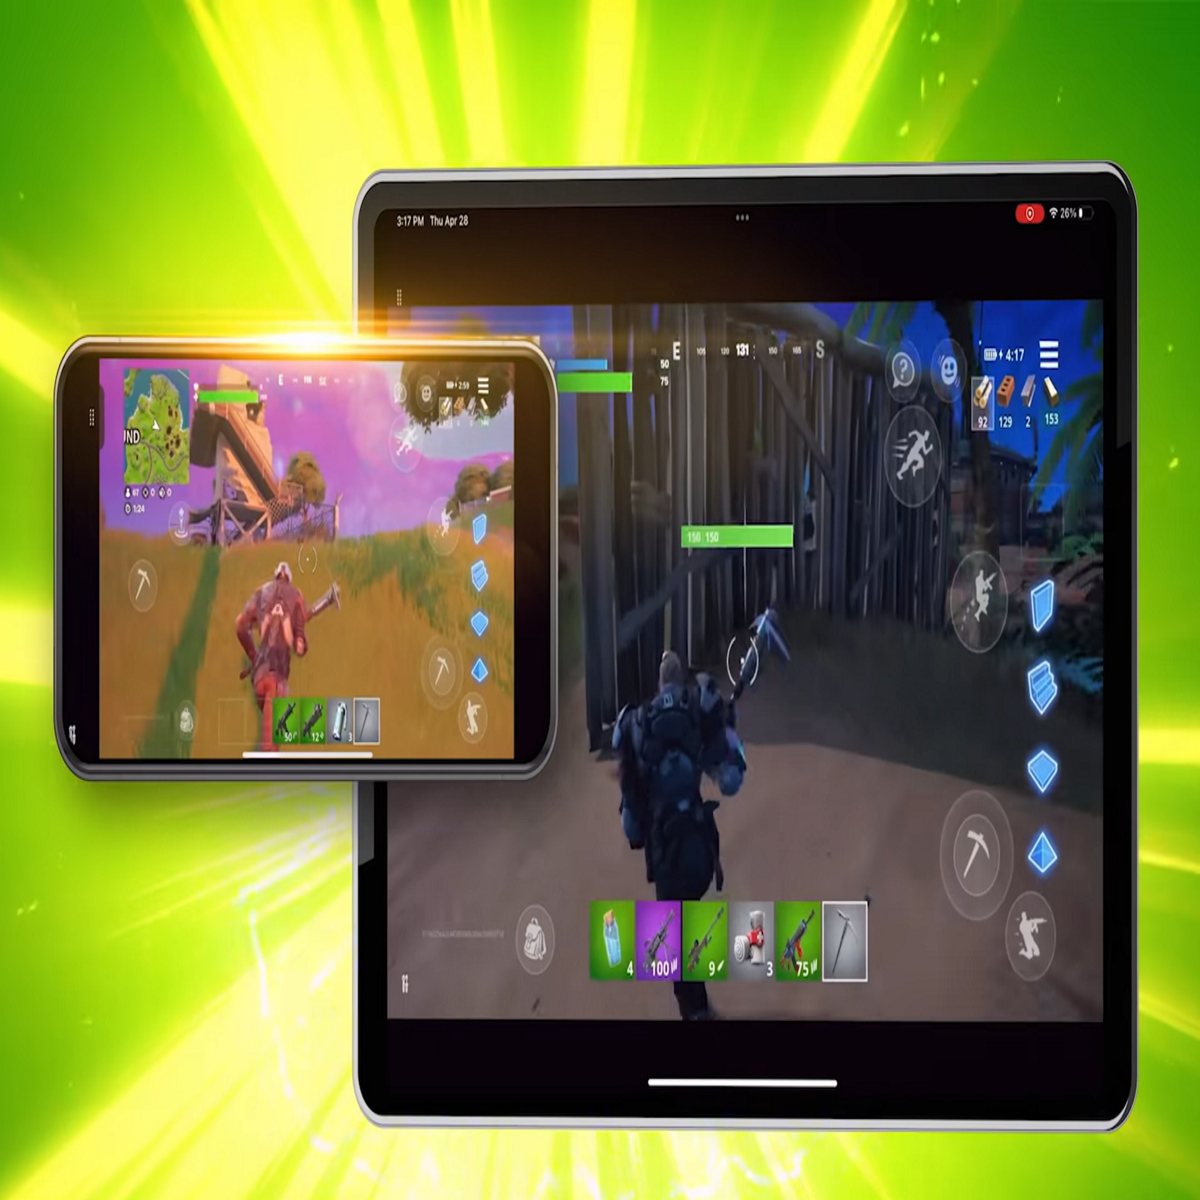 Fortnite Returns to Phones Thanks to Xbox Cloud Gaming